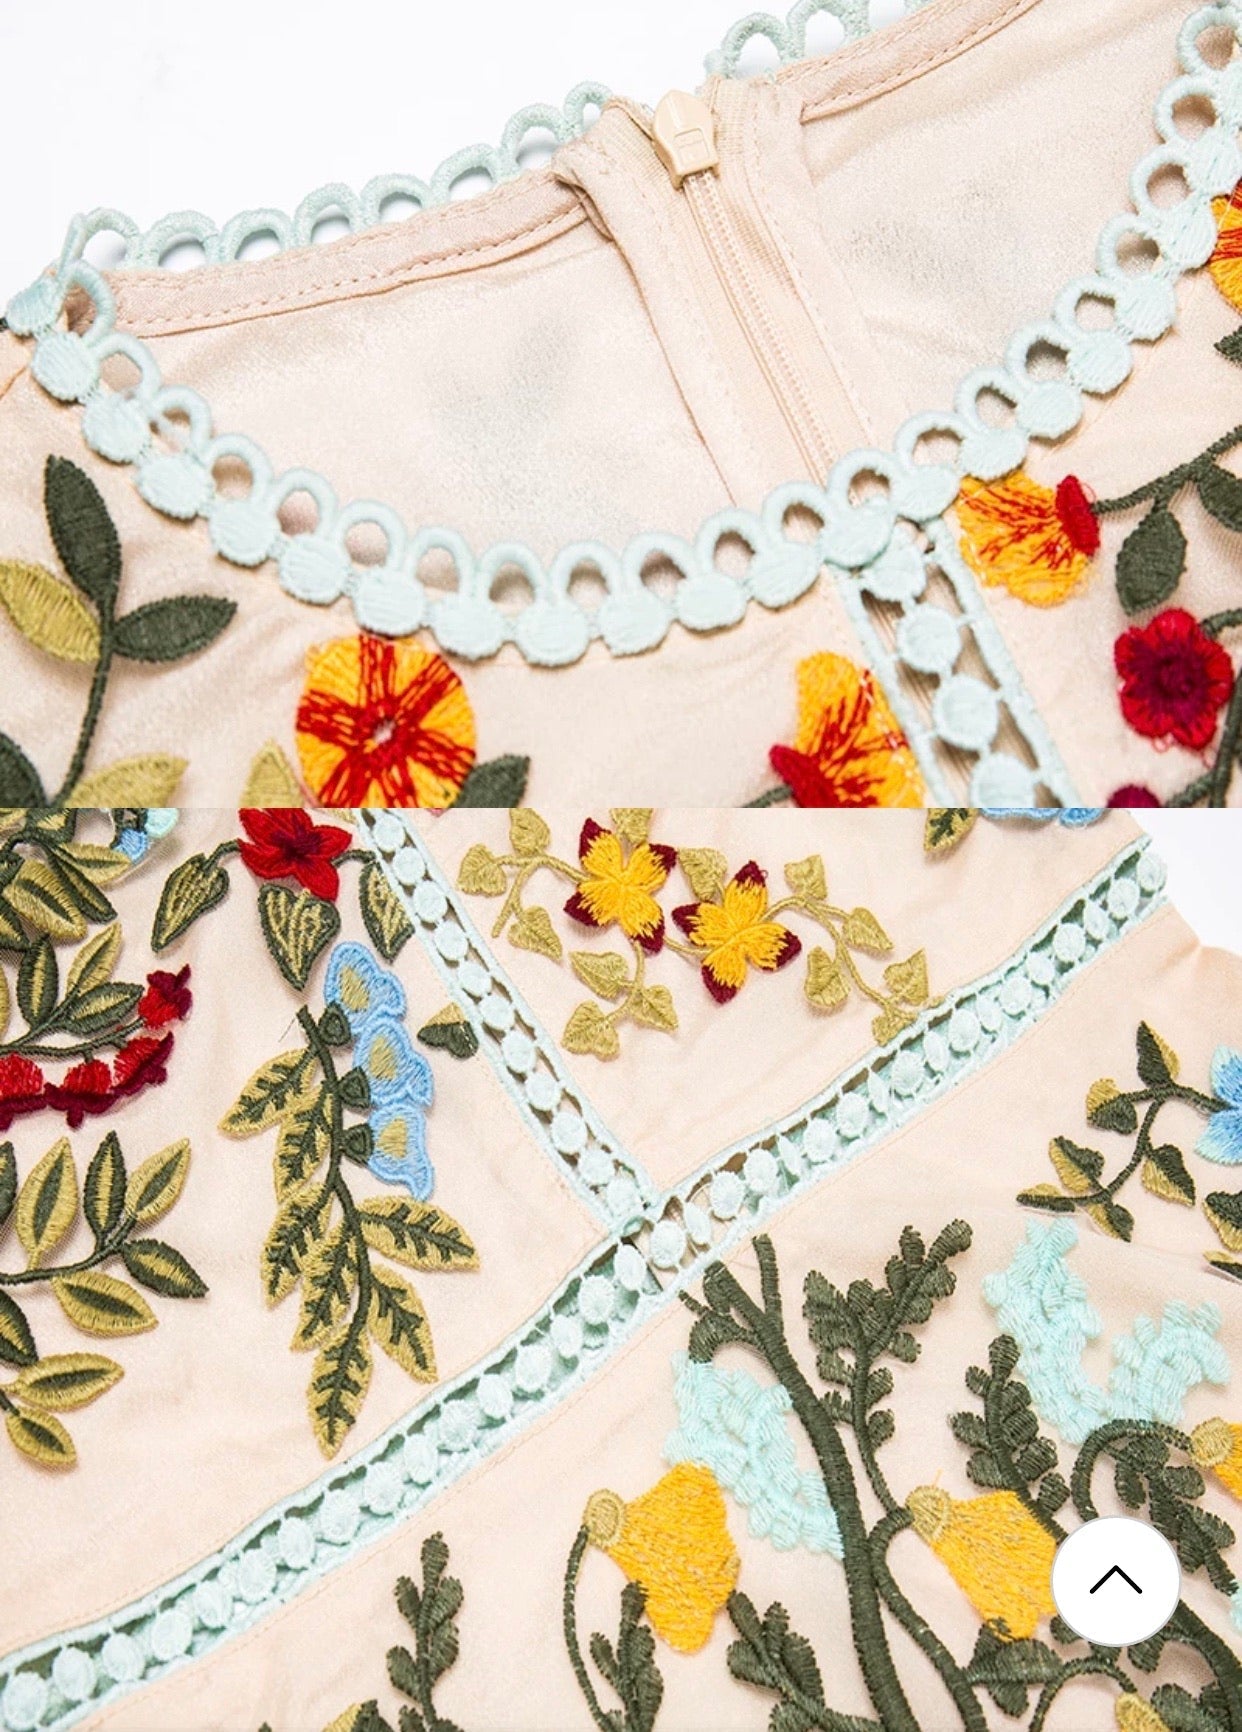 Floral Embroidery Dress